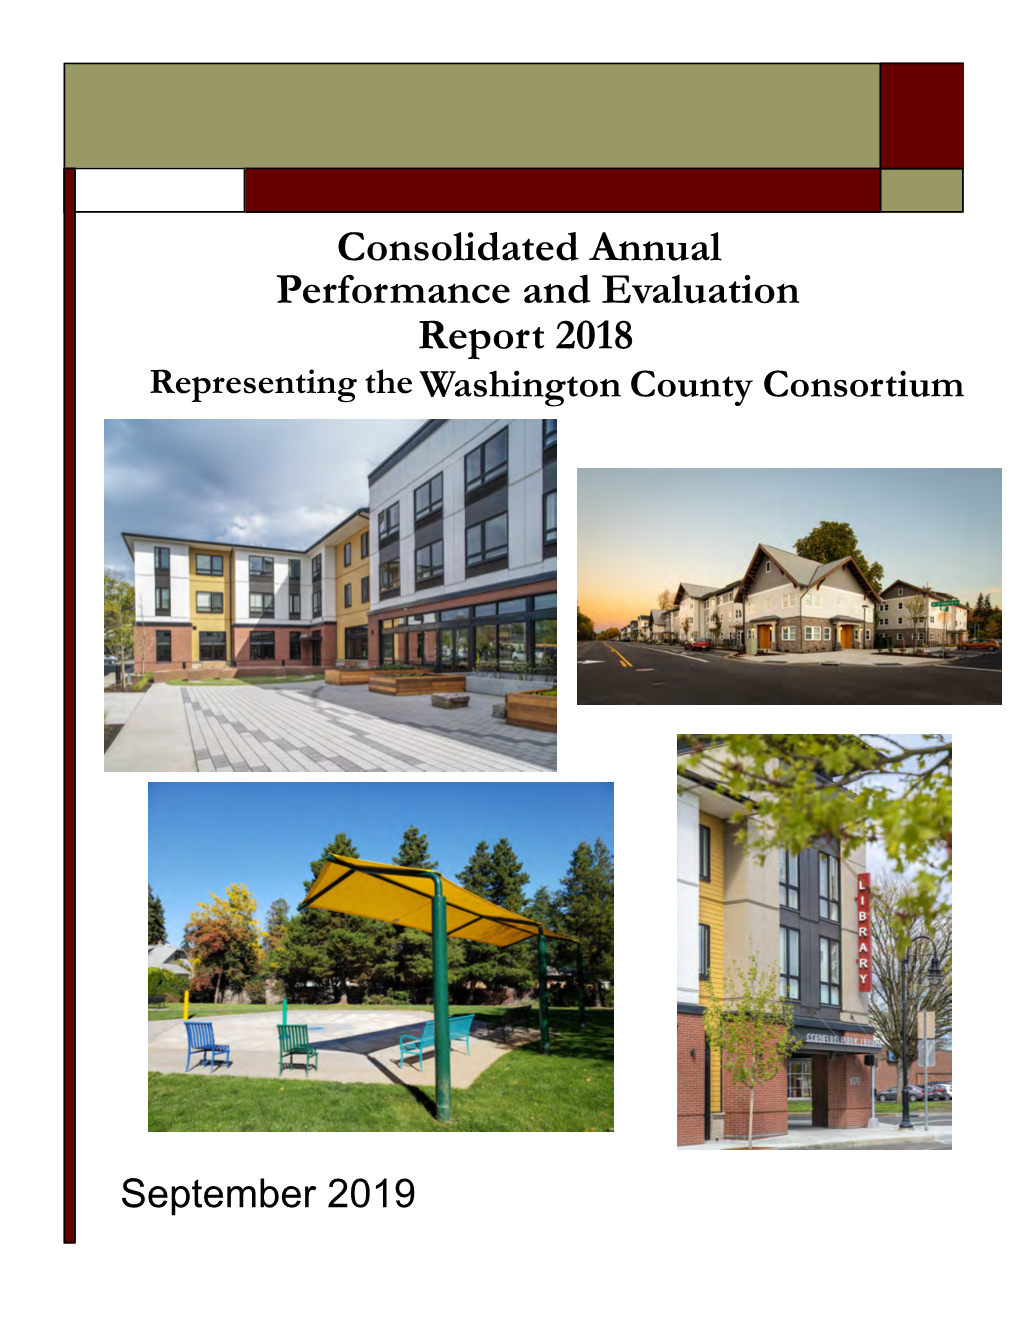 Consolidated Annual Performance and Evaluation Report 2018 Representing the Washington County Consortium